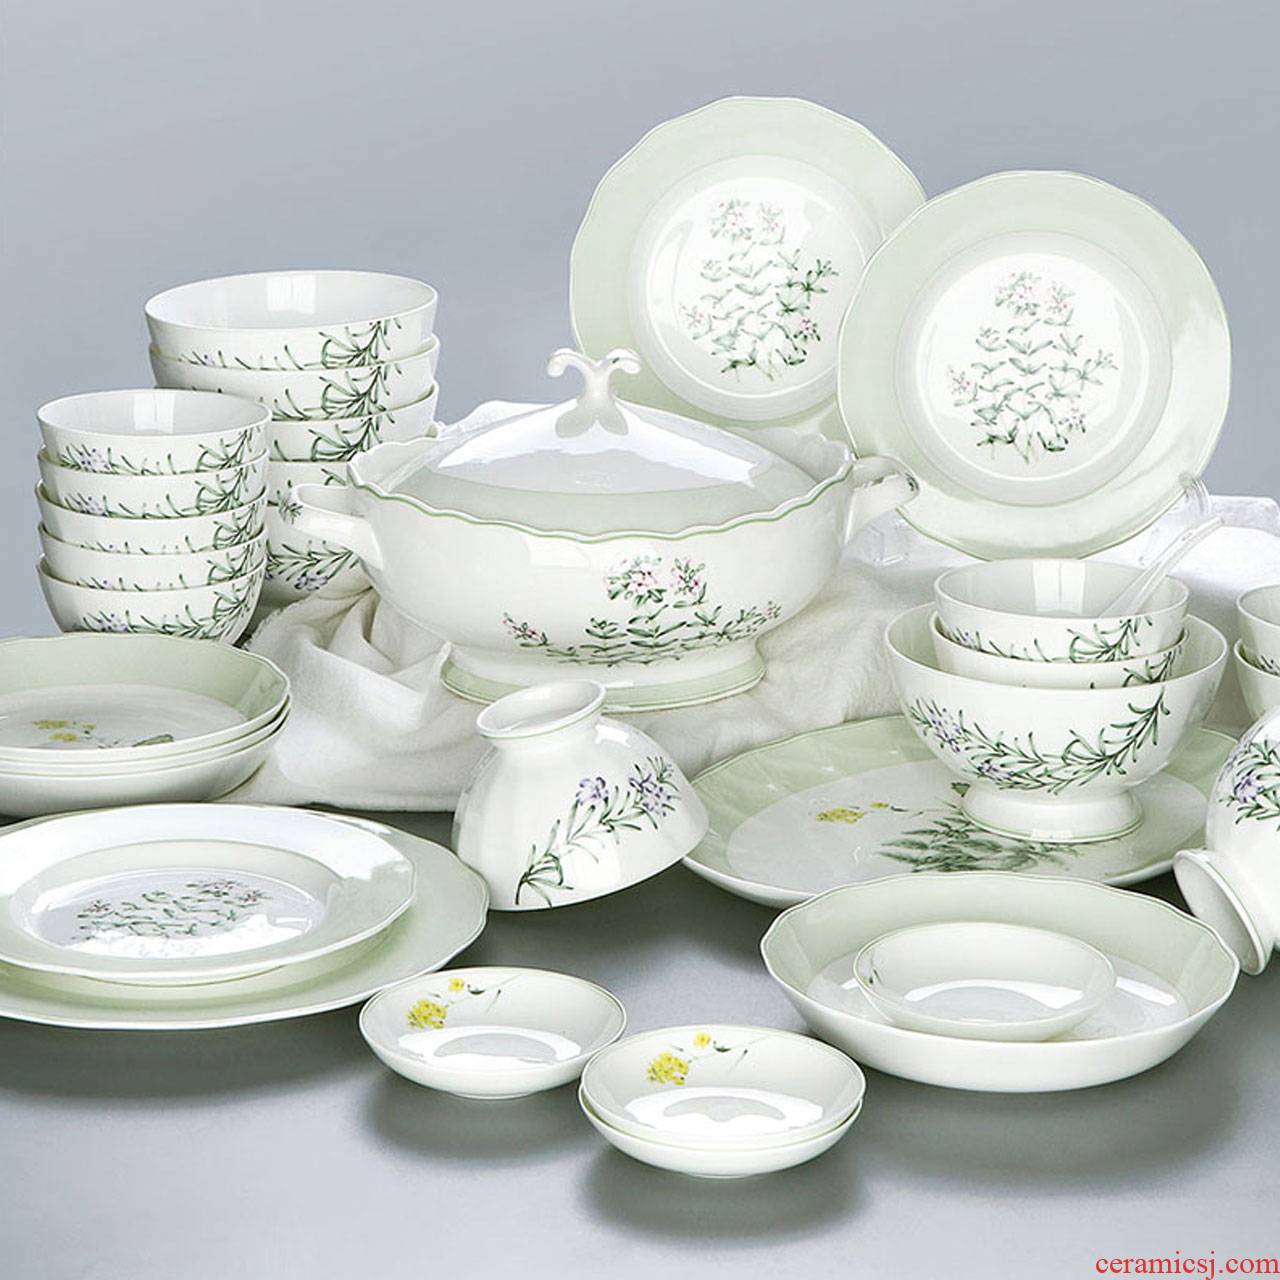 Chinese creative tableware suit household jingdezhen ipads porcelain dishes suit combination of pale green jade lotus expressions using plate of ceramics